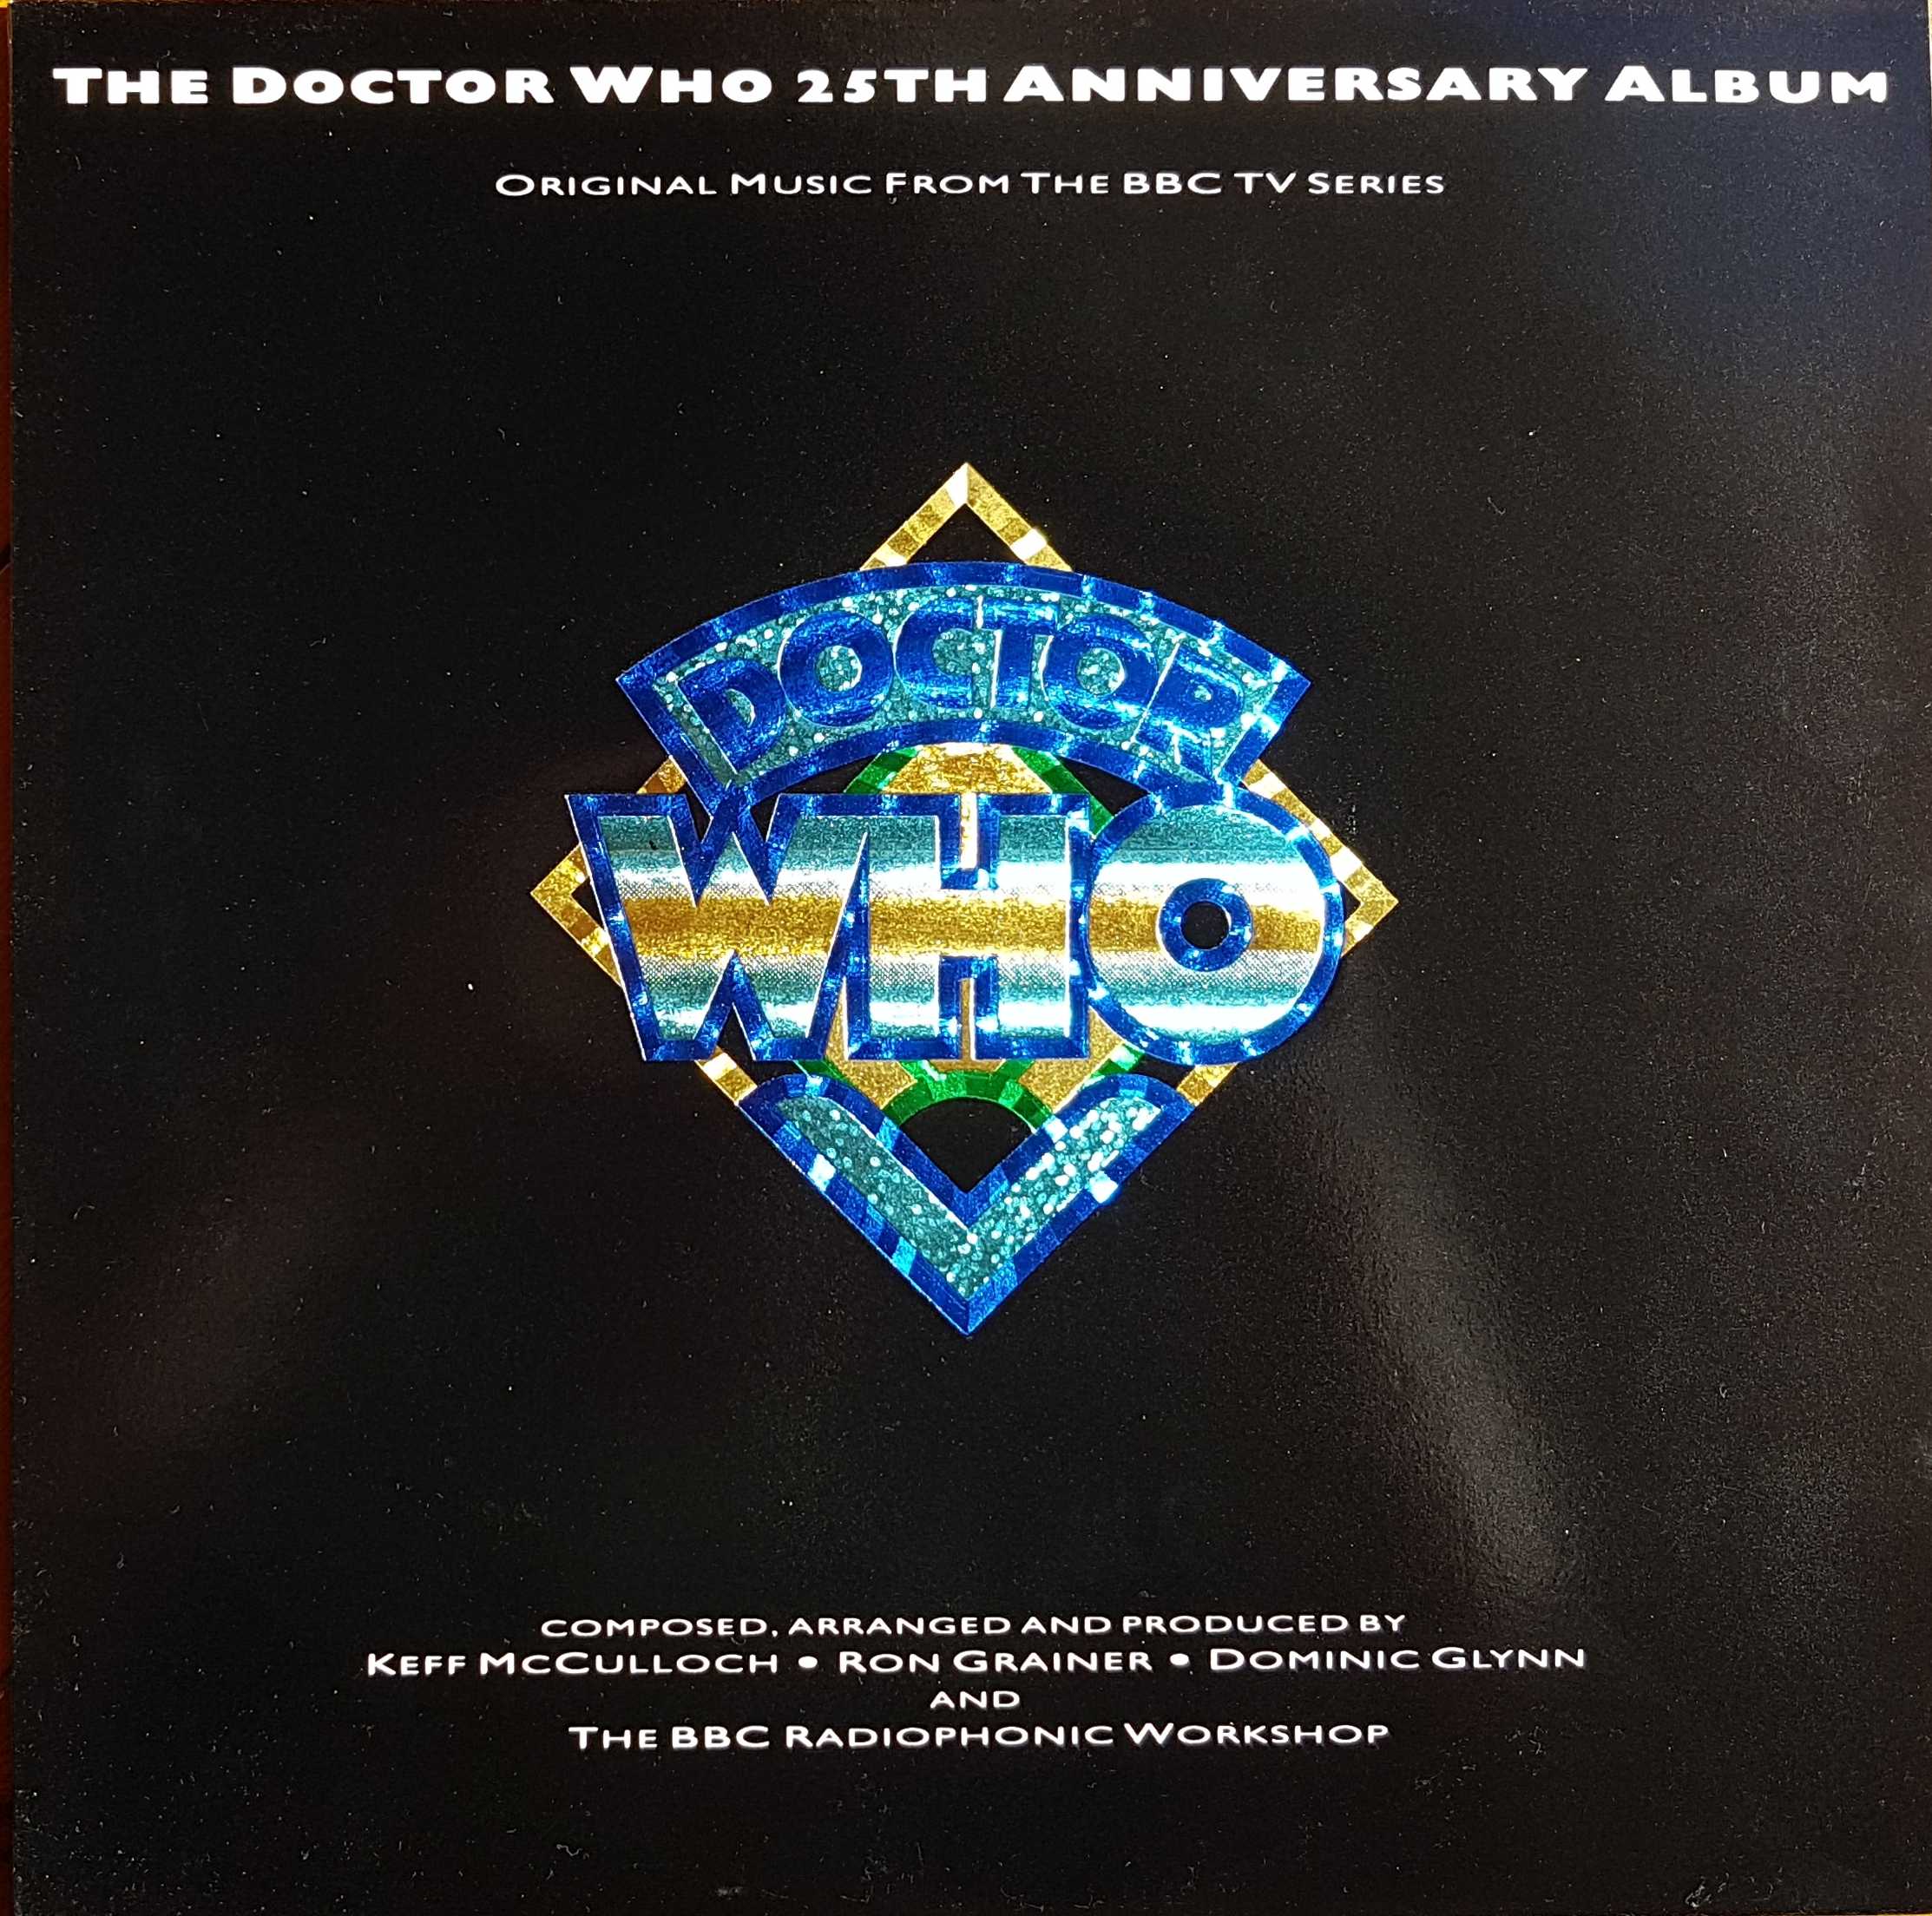 Picture of REB 707 Doctor Who - 25th anniversary album by artist Ron Grainer / Dominic Glynn / Keff McCulloch from the BBC albums - Records and Tapes library